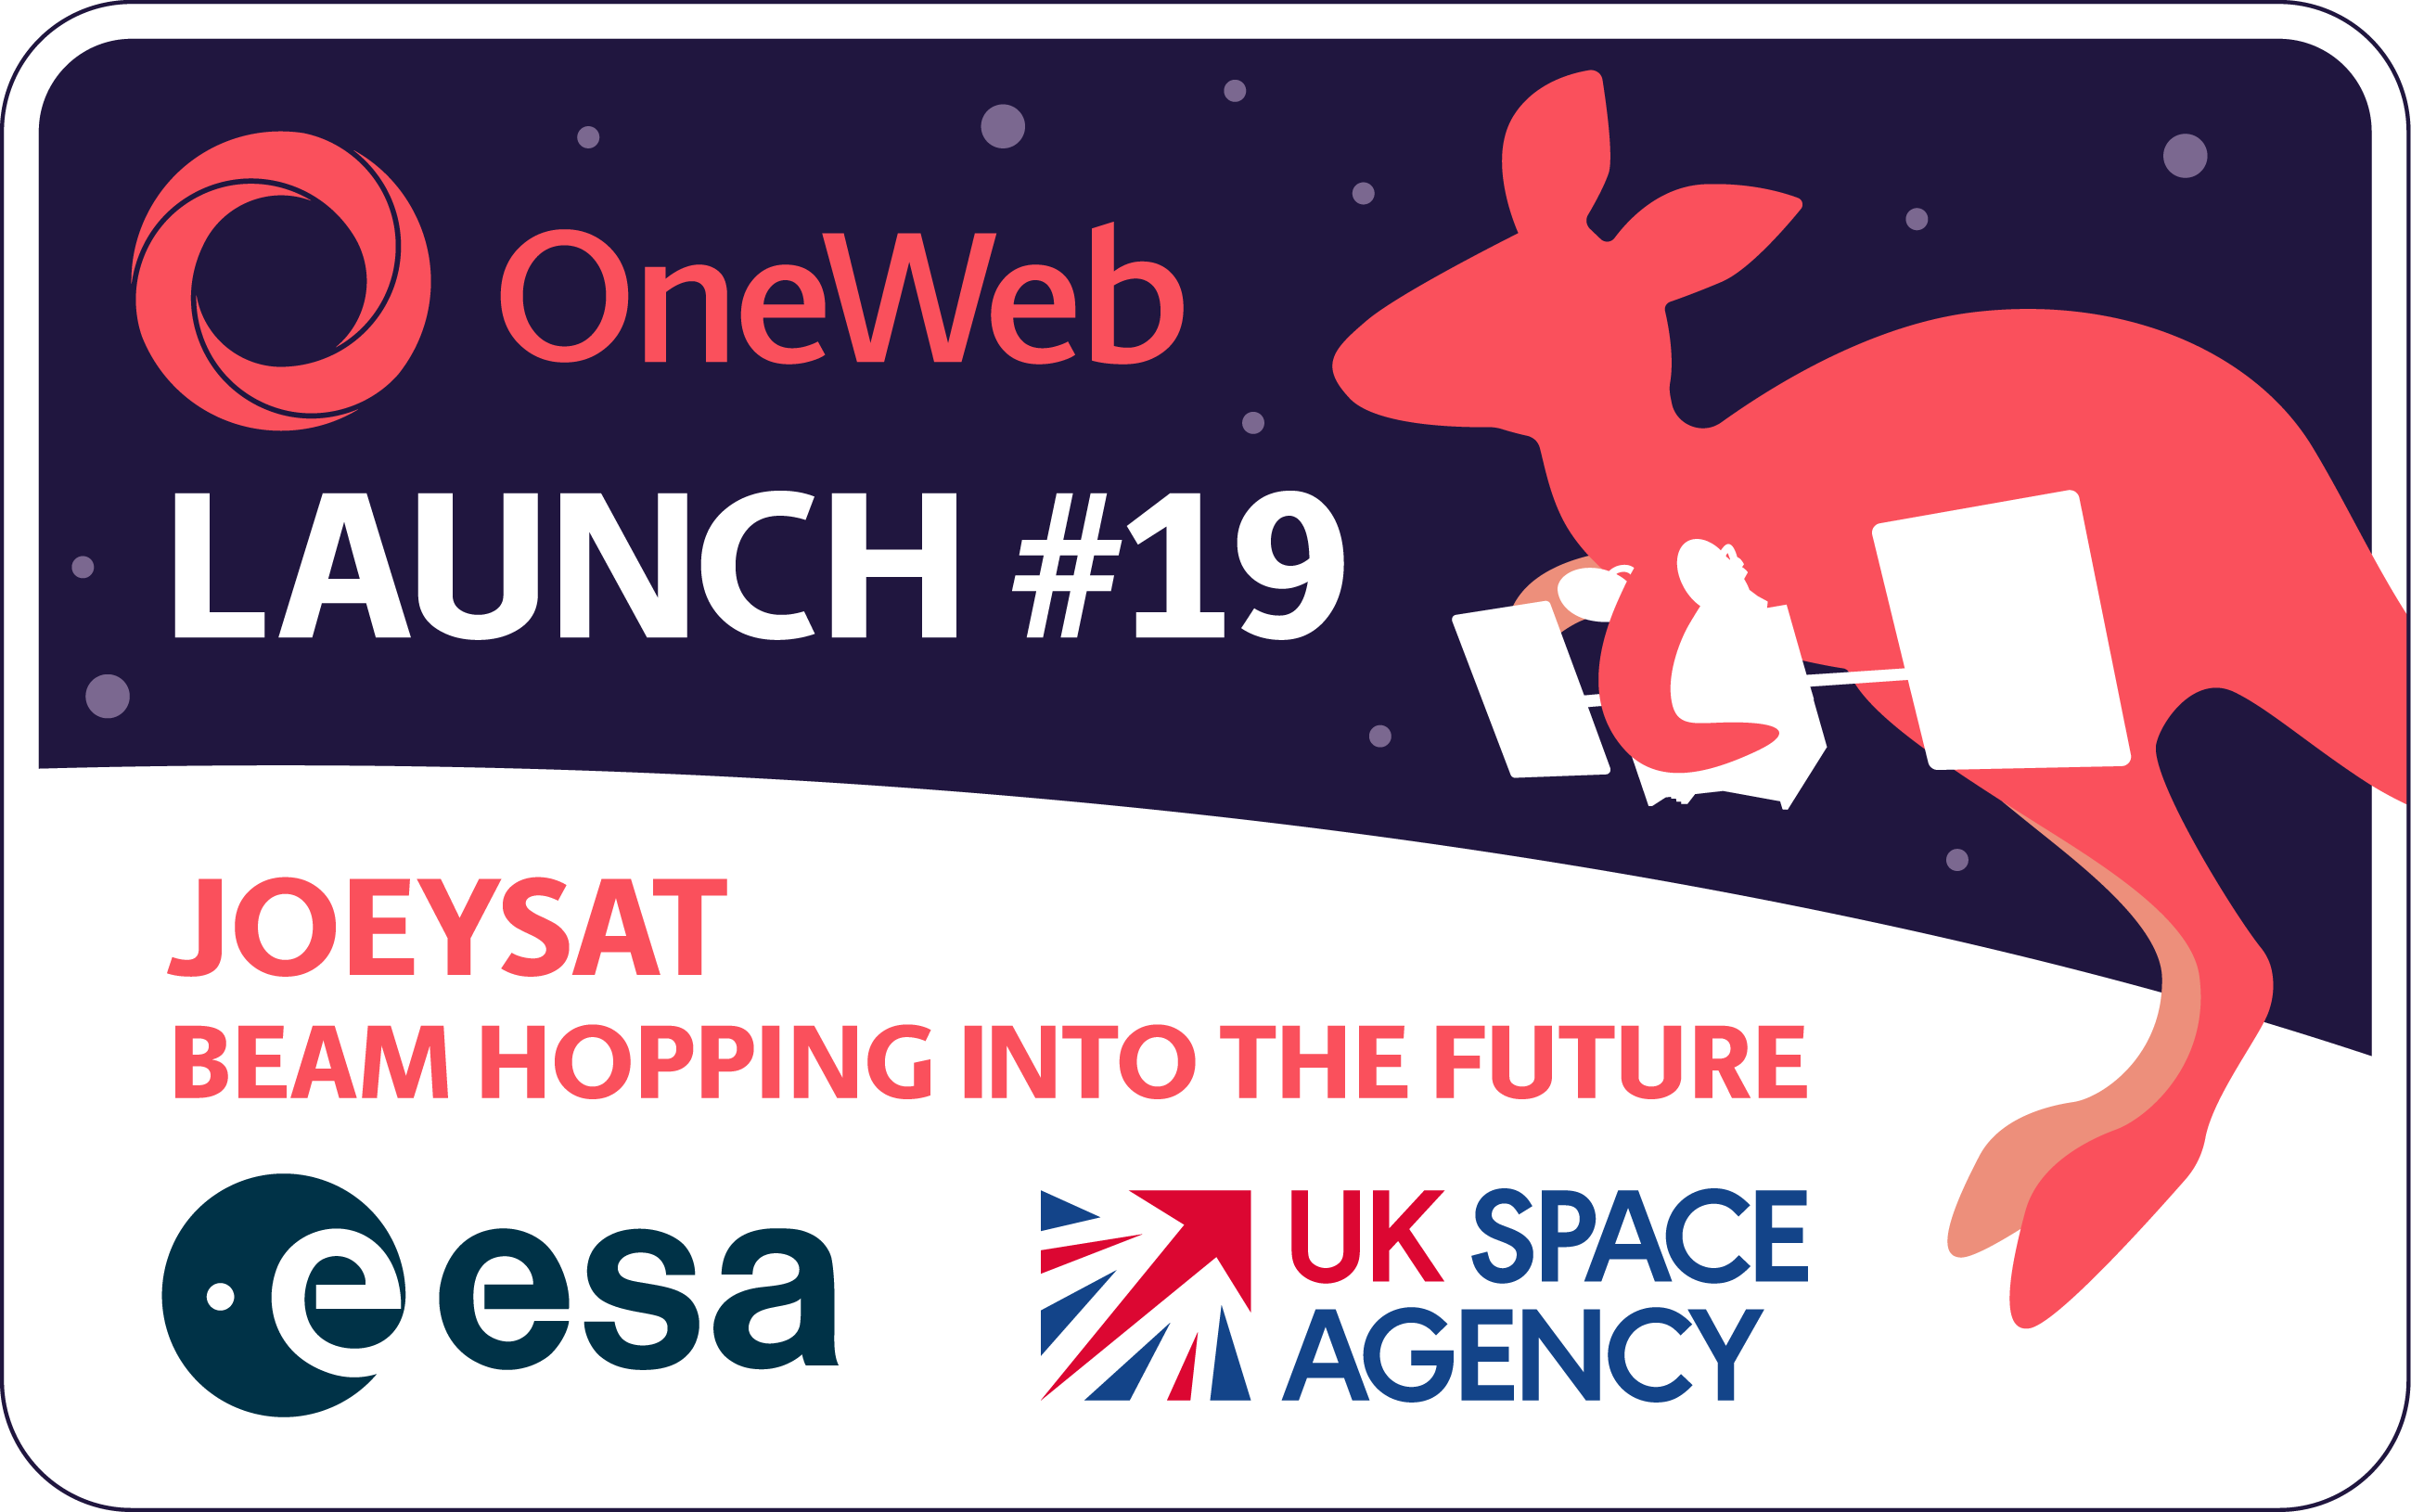 Mission badge for the OneWeb launch. (Image: OneWeb)